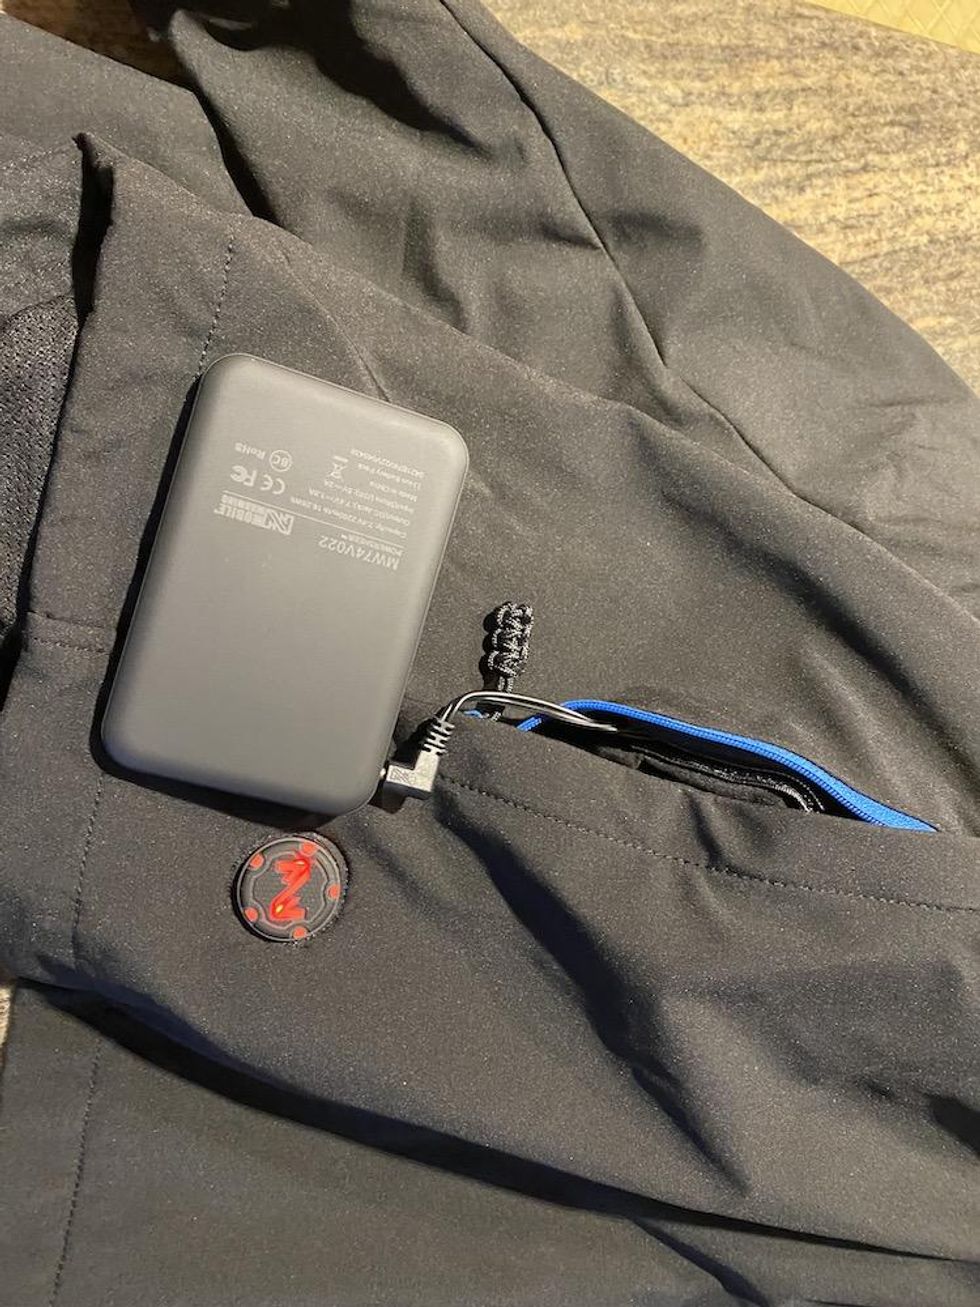 a photo of 7v battery connected to jacket